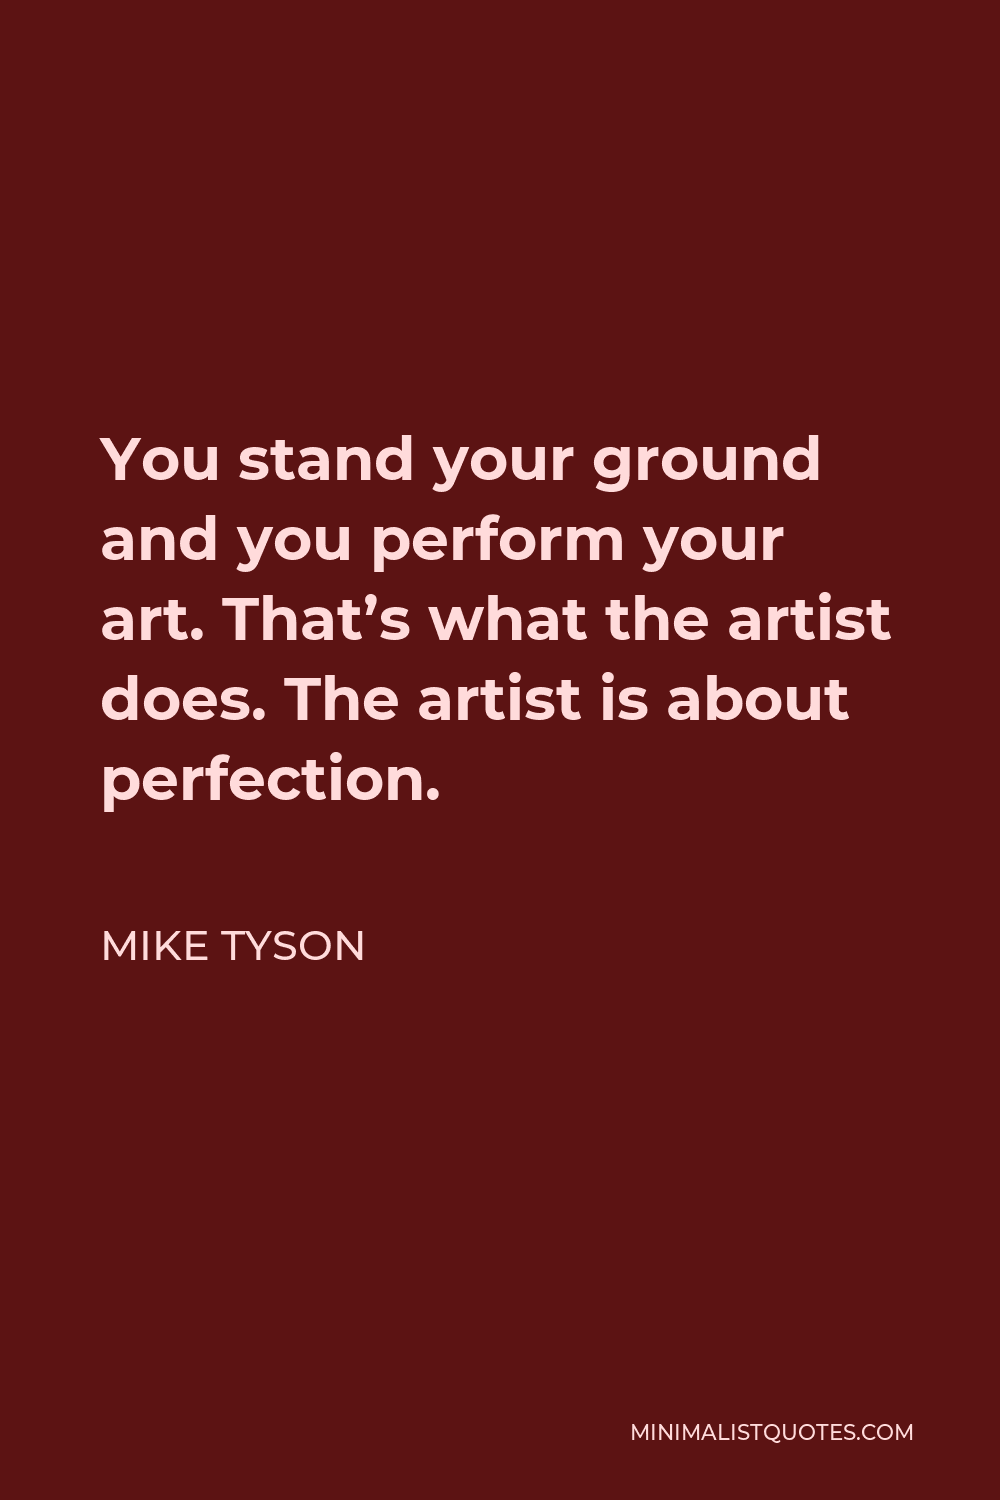 Mike Tyson Quote - You stand your ground and you perform your art. That’s what the artist does. The artist is about perfection.